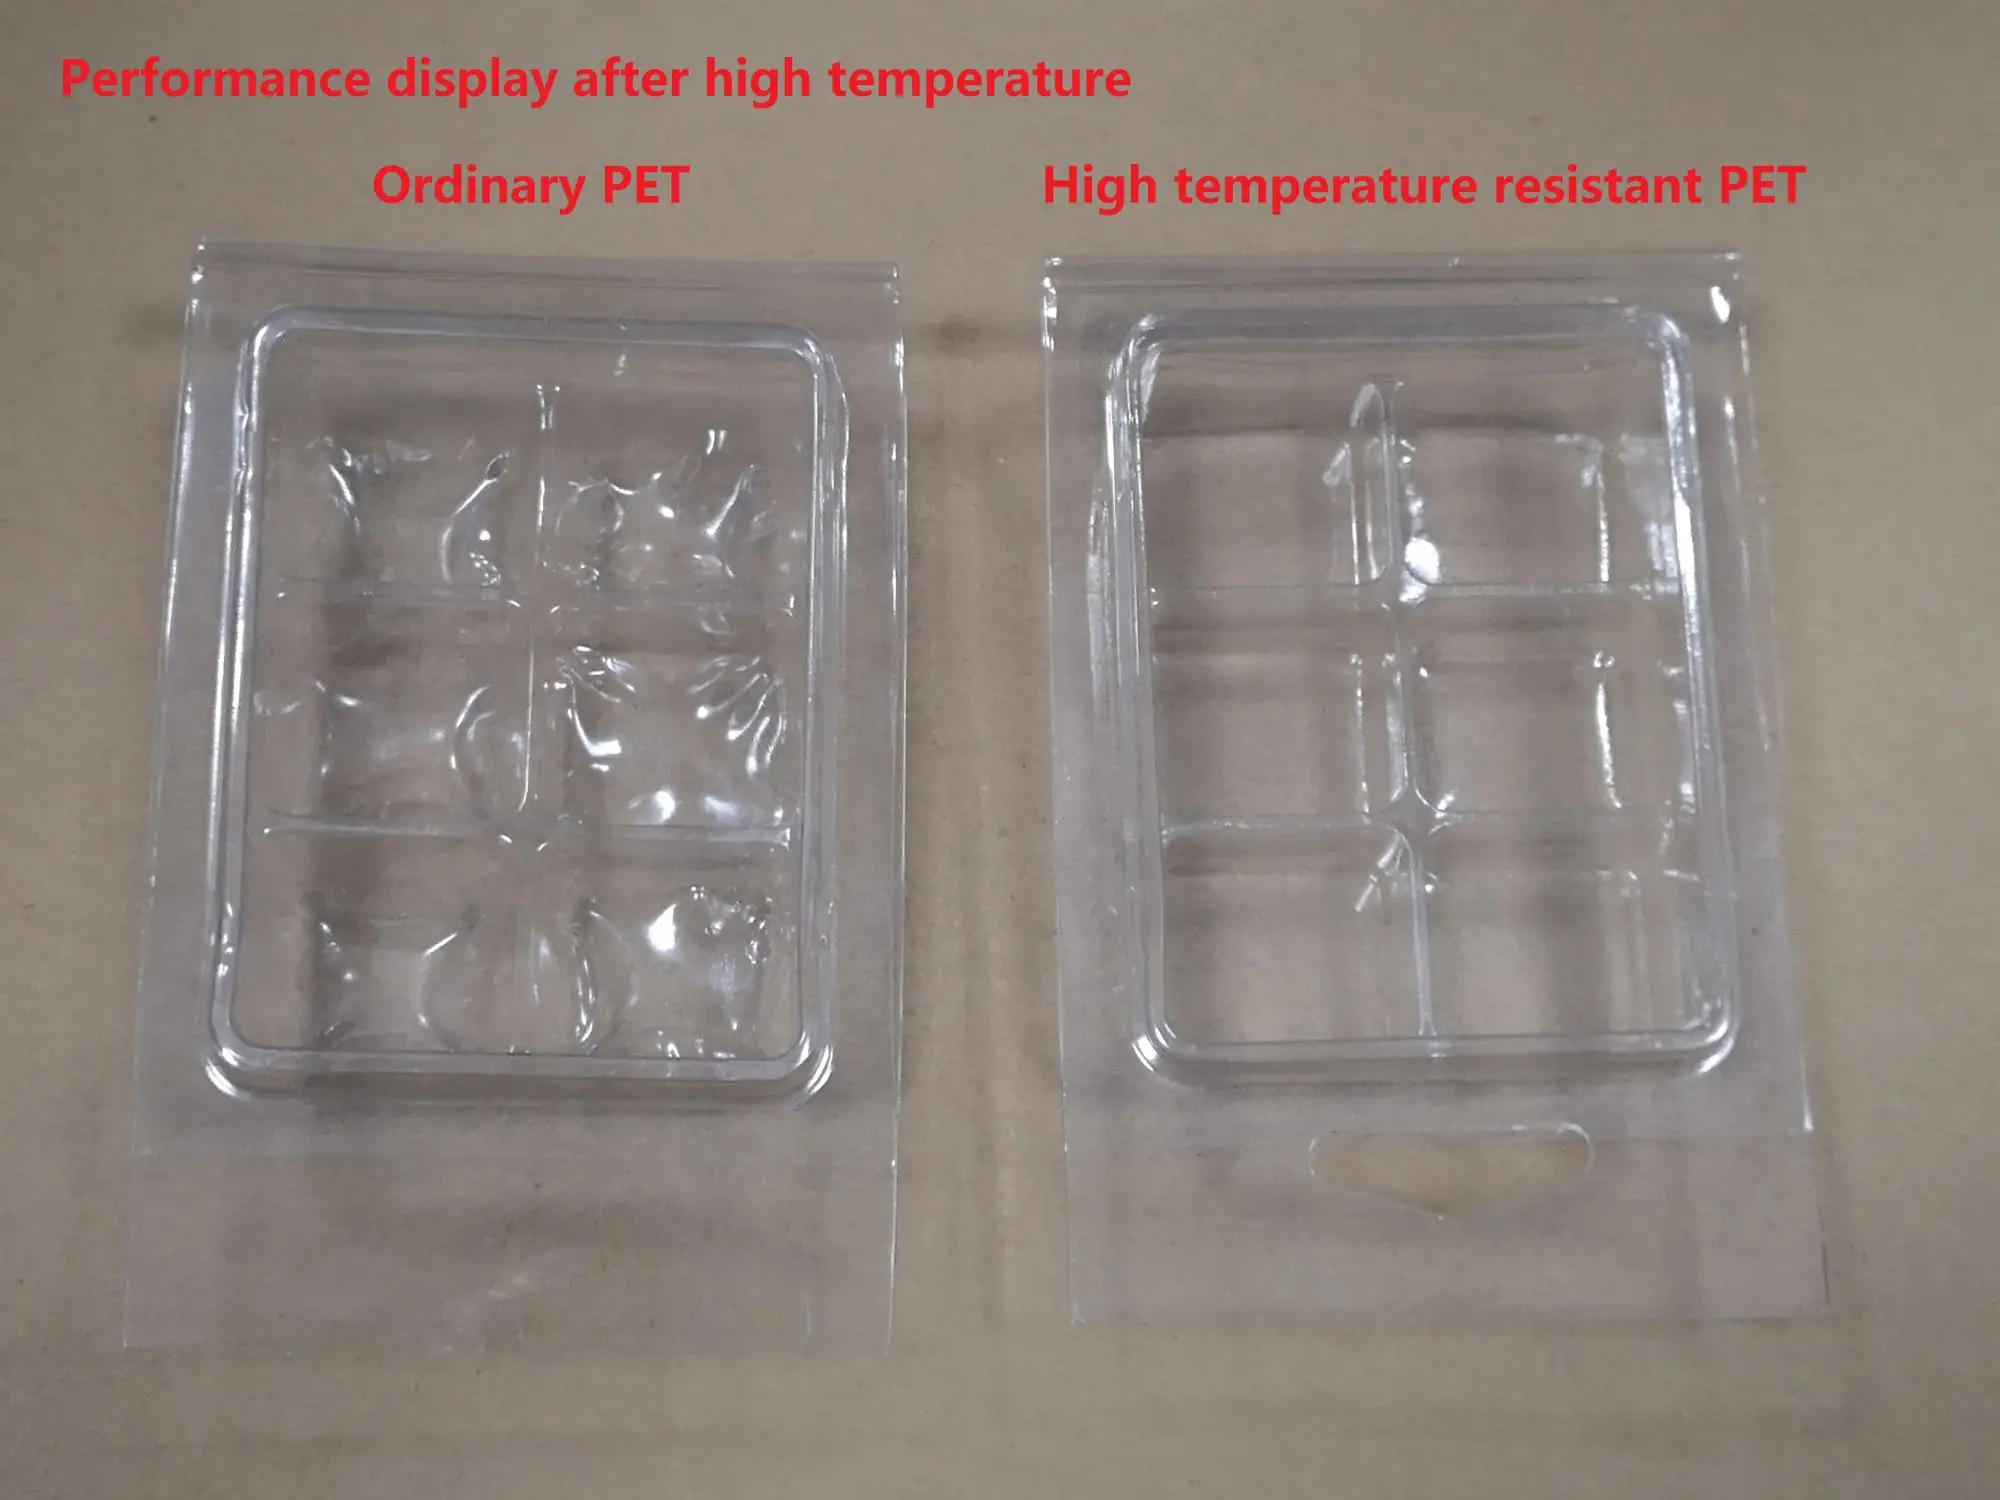 Download Wholesale Plastic Custom Wax Melts Clamshell Blister Packaging - Buy Wax Melt Packaging ...